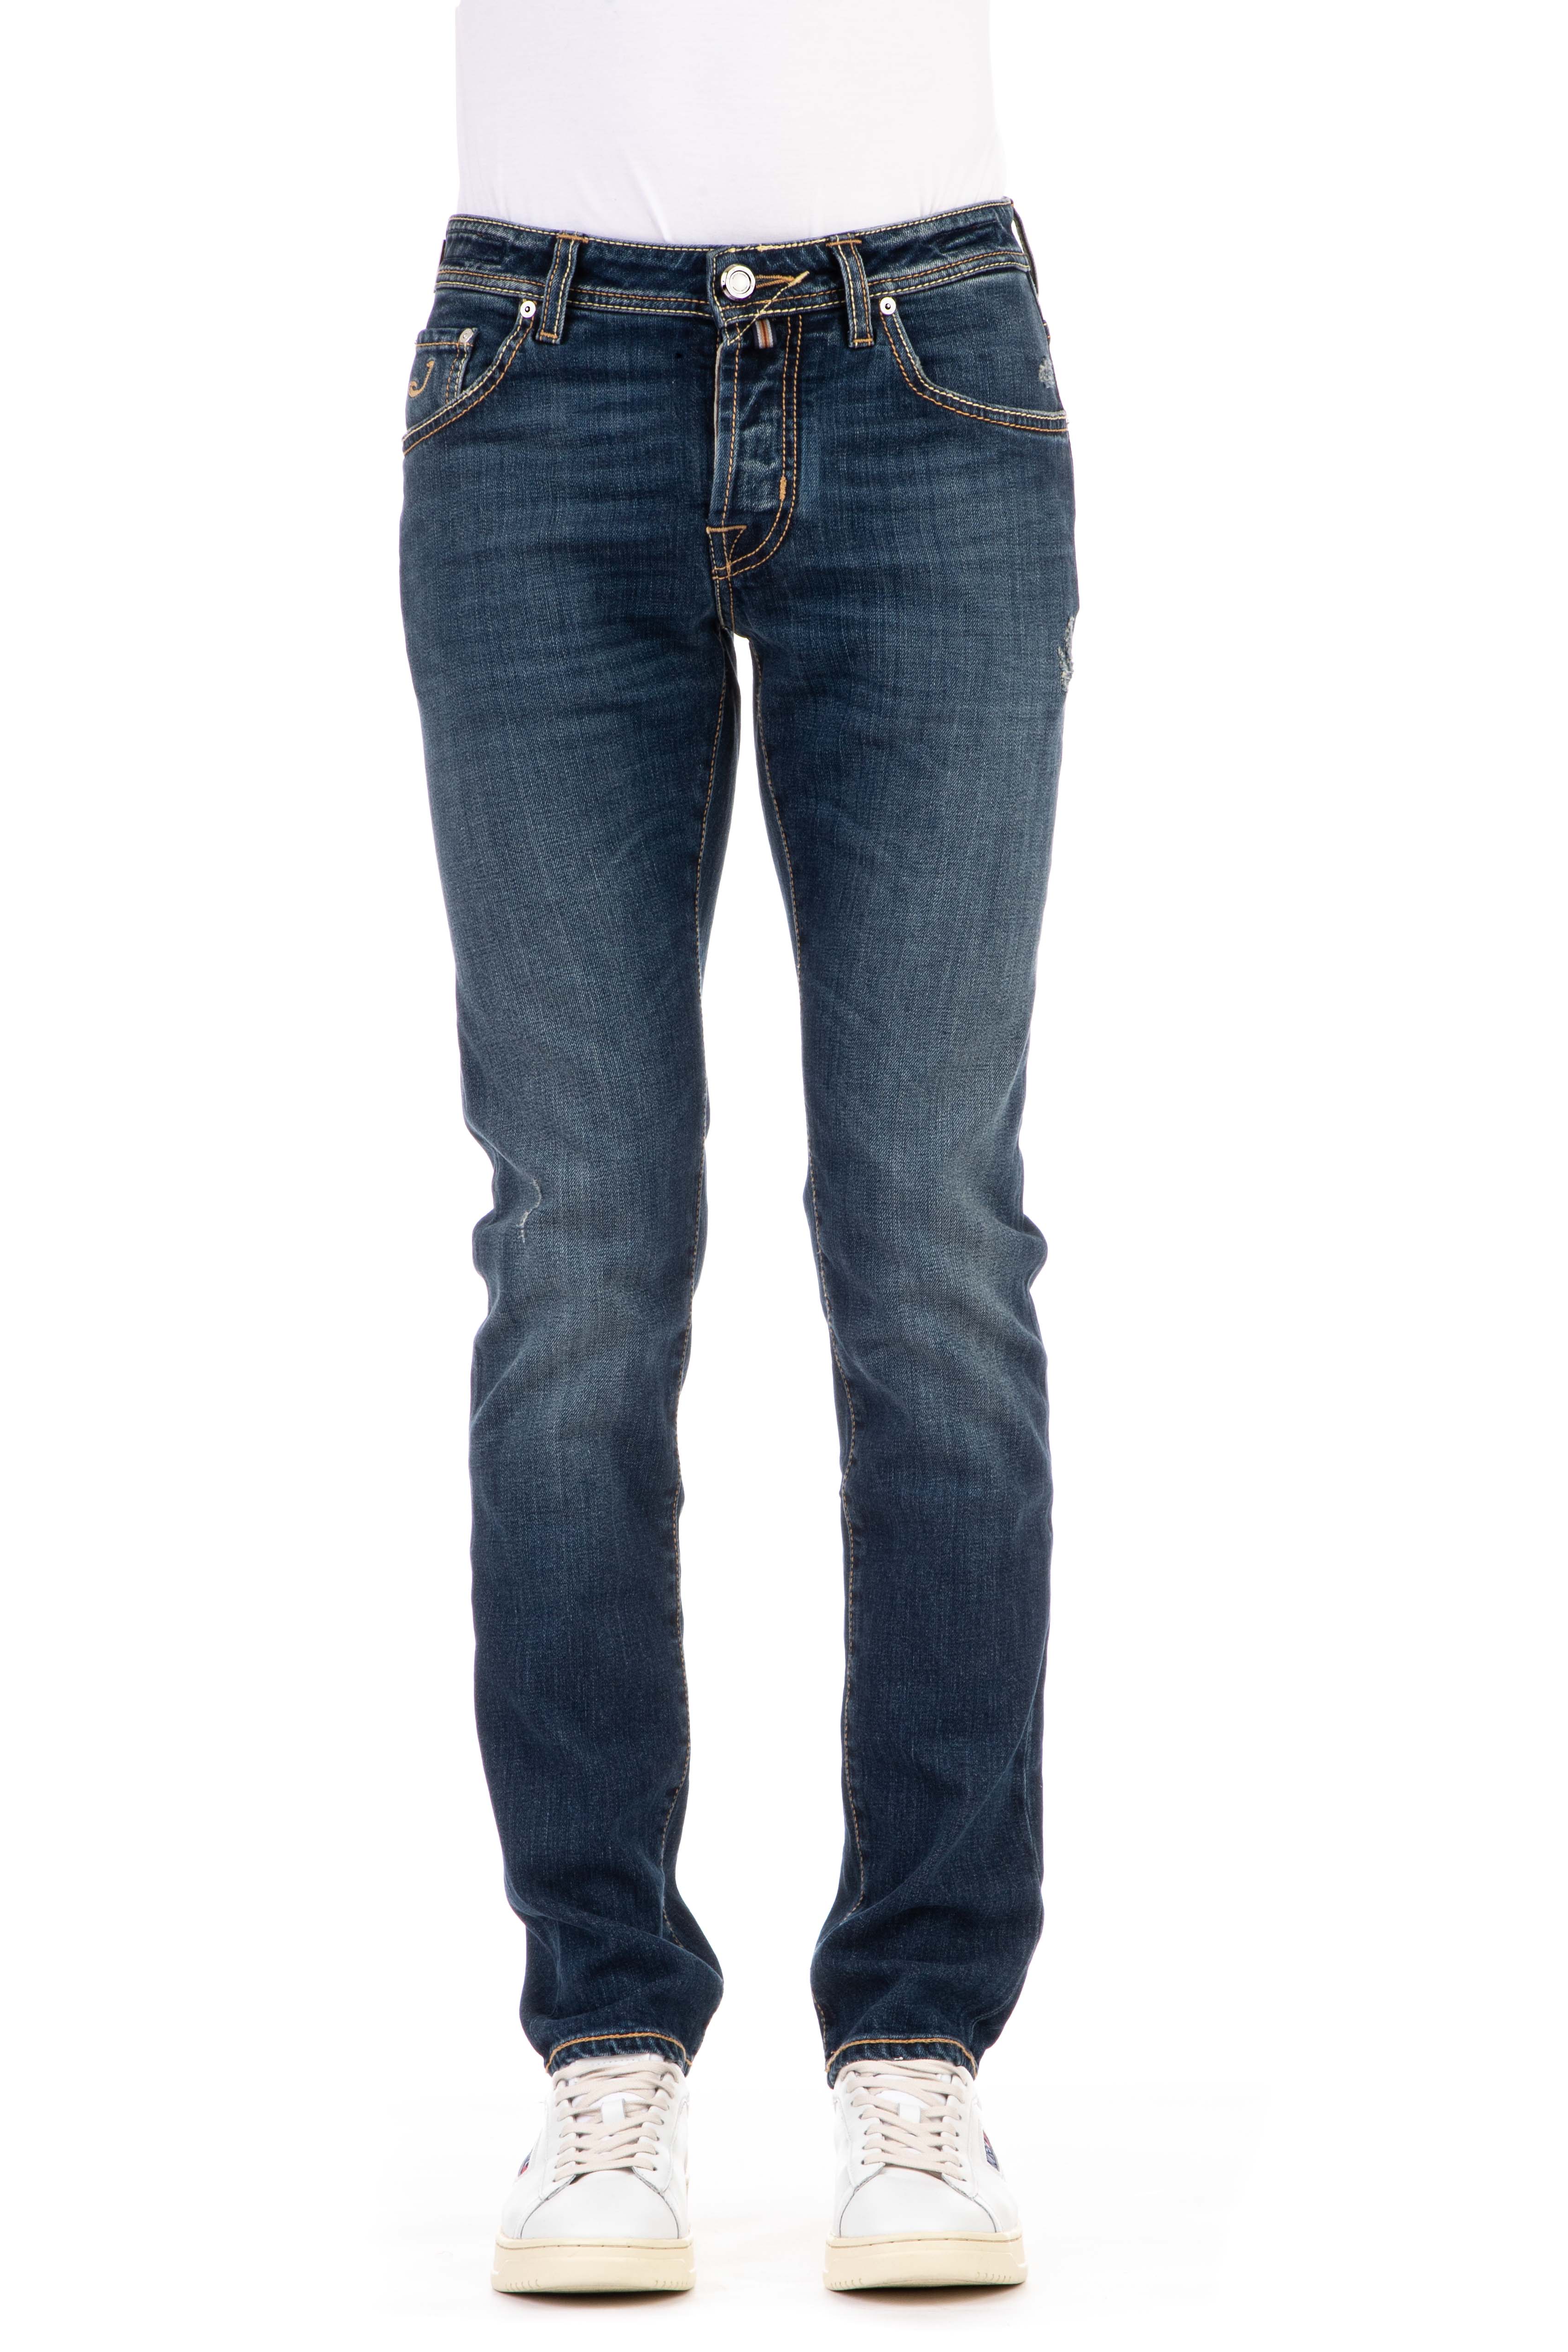 Limited edition jeans with light blue label and nick fit